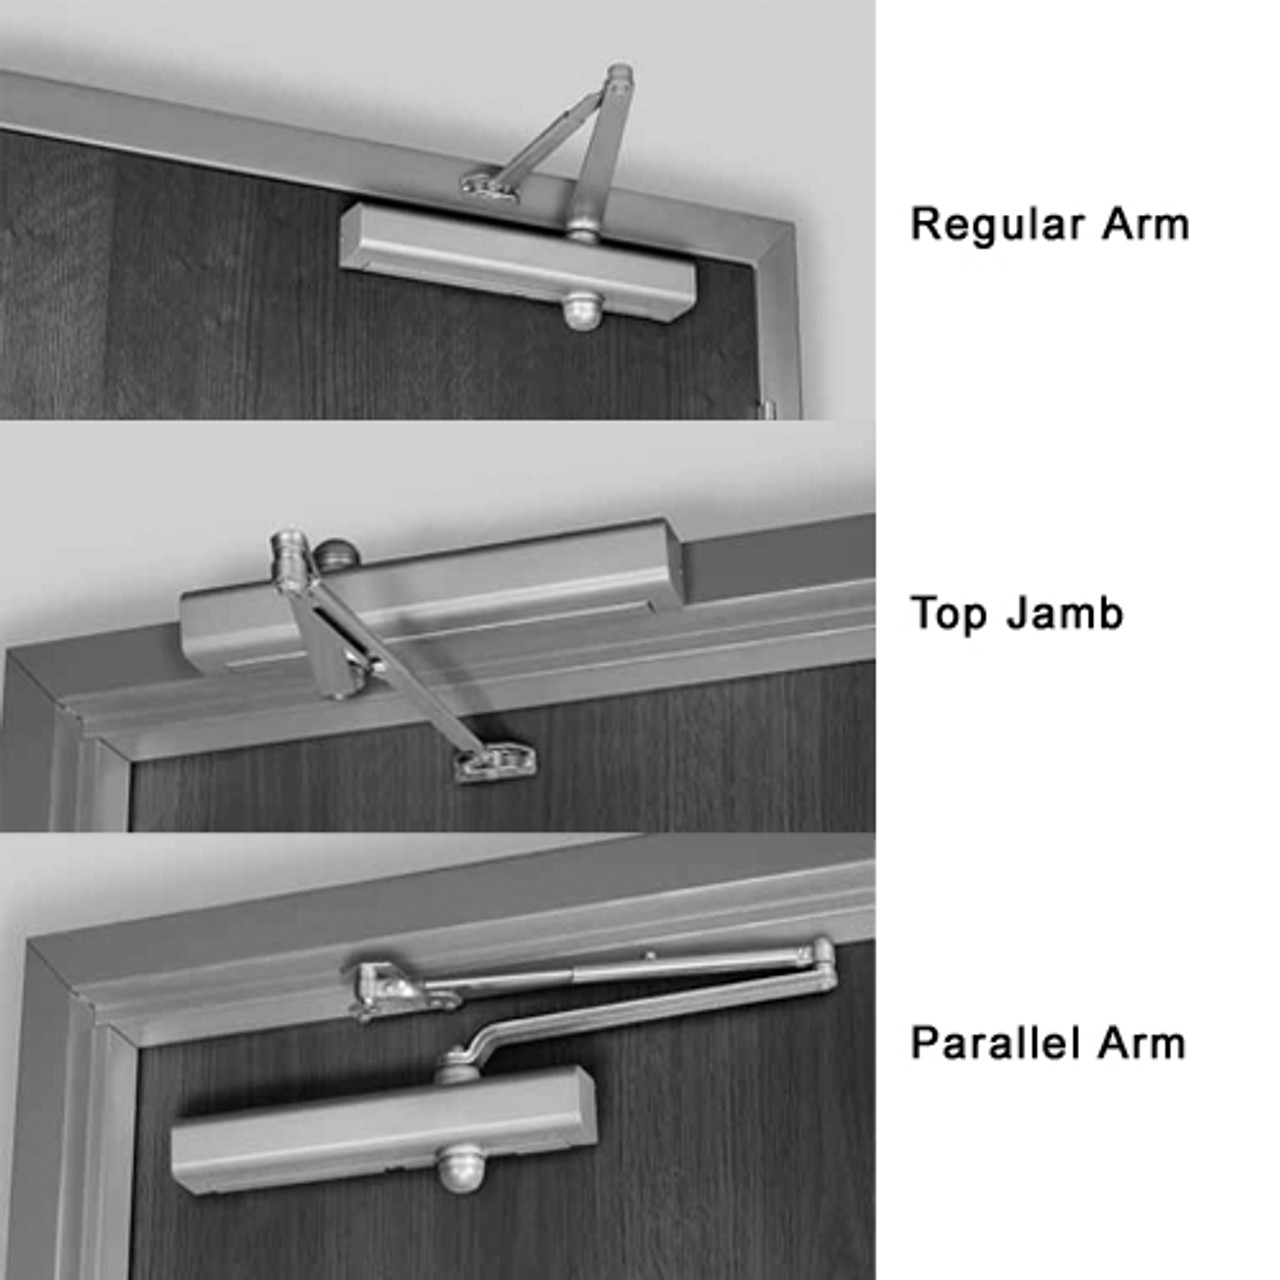 8301-691 Norton 8000 Series Non-Hold Open Door Closers with Regular Parallel and Top Jamb to 3 inch Reveal in Dull Bronze Finish